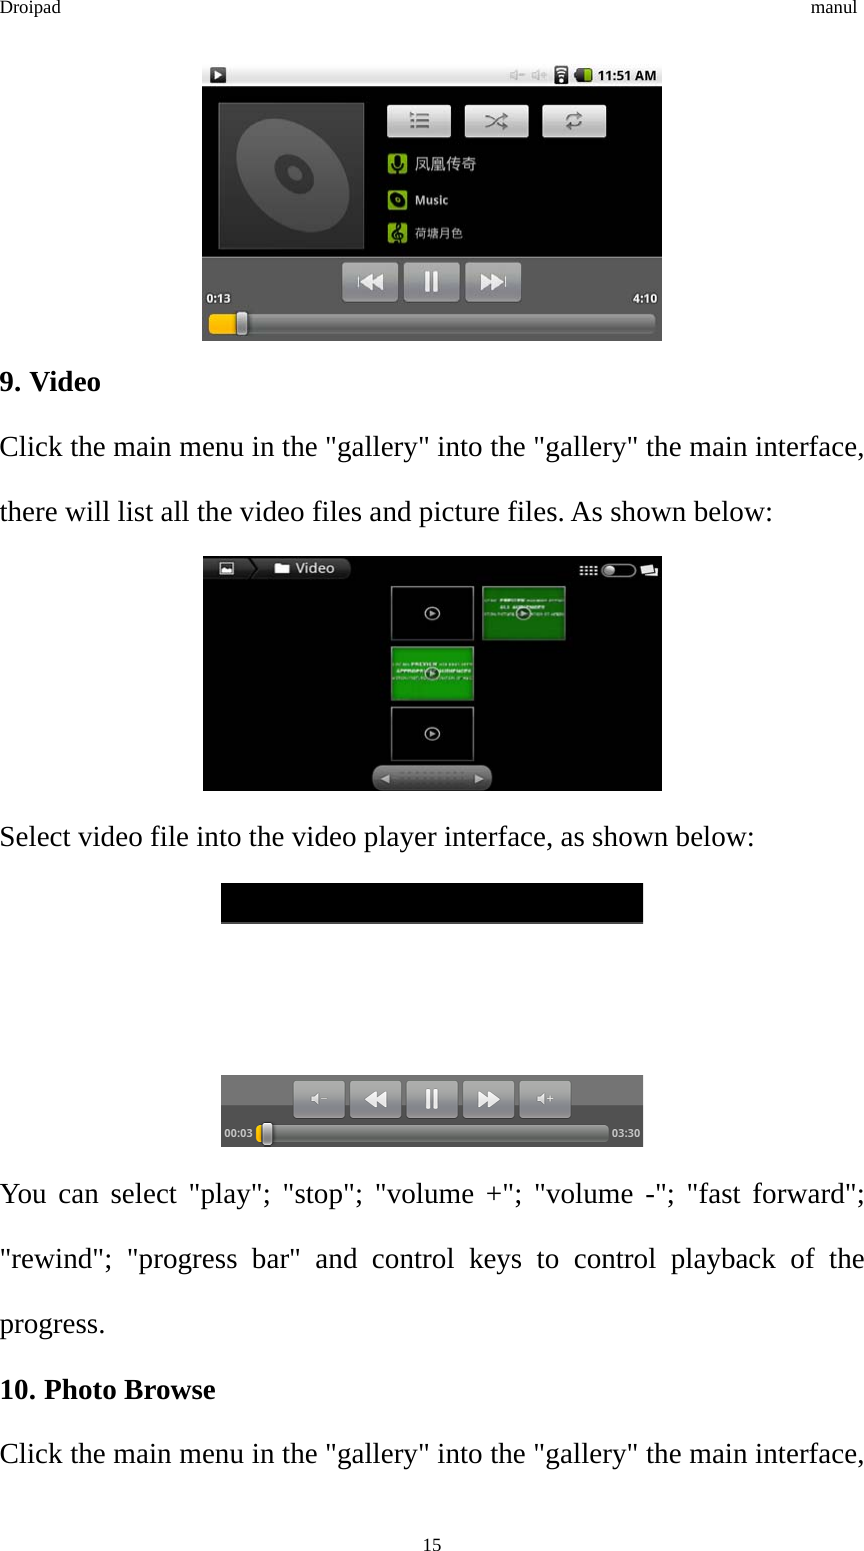 Droipad                                                                                manul  9. Video Click the main menu in the &quot;gallery&quot; into the &quot;gallery&quot; the main interface, there will list all the video files and picture files. As shown below:  Select video file into the video player interface, as shown below:  You can select &quot;play&quot;; &quot;stop&quot;; &quot;volume +&quot;; &quot;volume -&quot;; &quot;fast forward&quot;; &quot;rewind&quot;; &quot;progress bar&quot; and control keys to control playback of the progress. 10. Photo Browse Click the main menu in the &quot;gallery&quot; into the &quot;gallery&quot; the main interface,  15